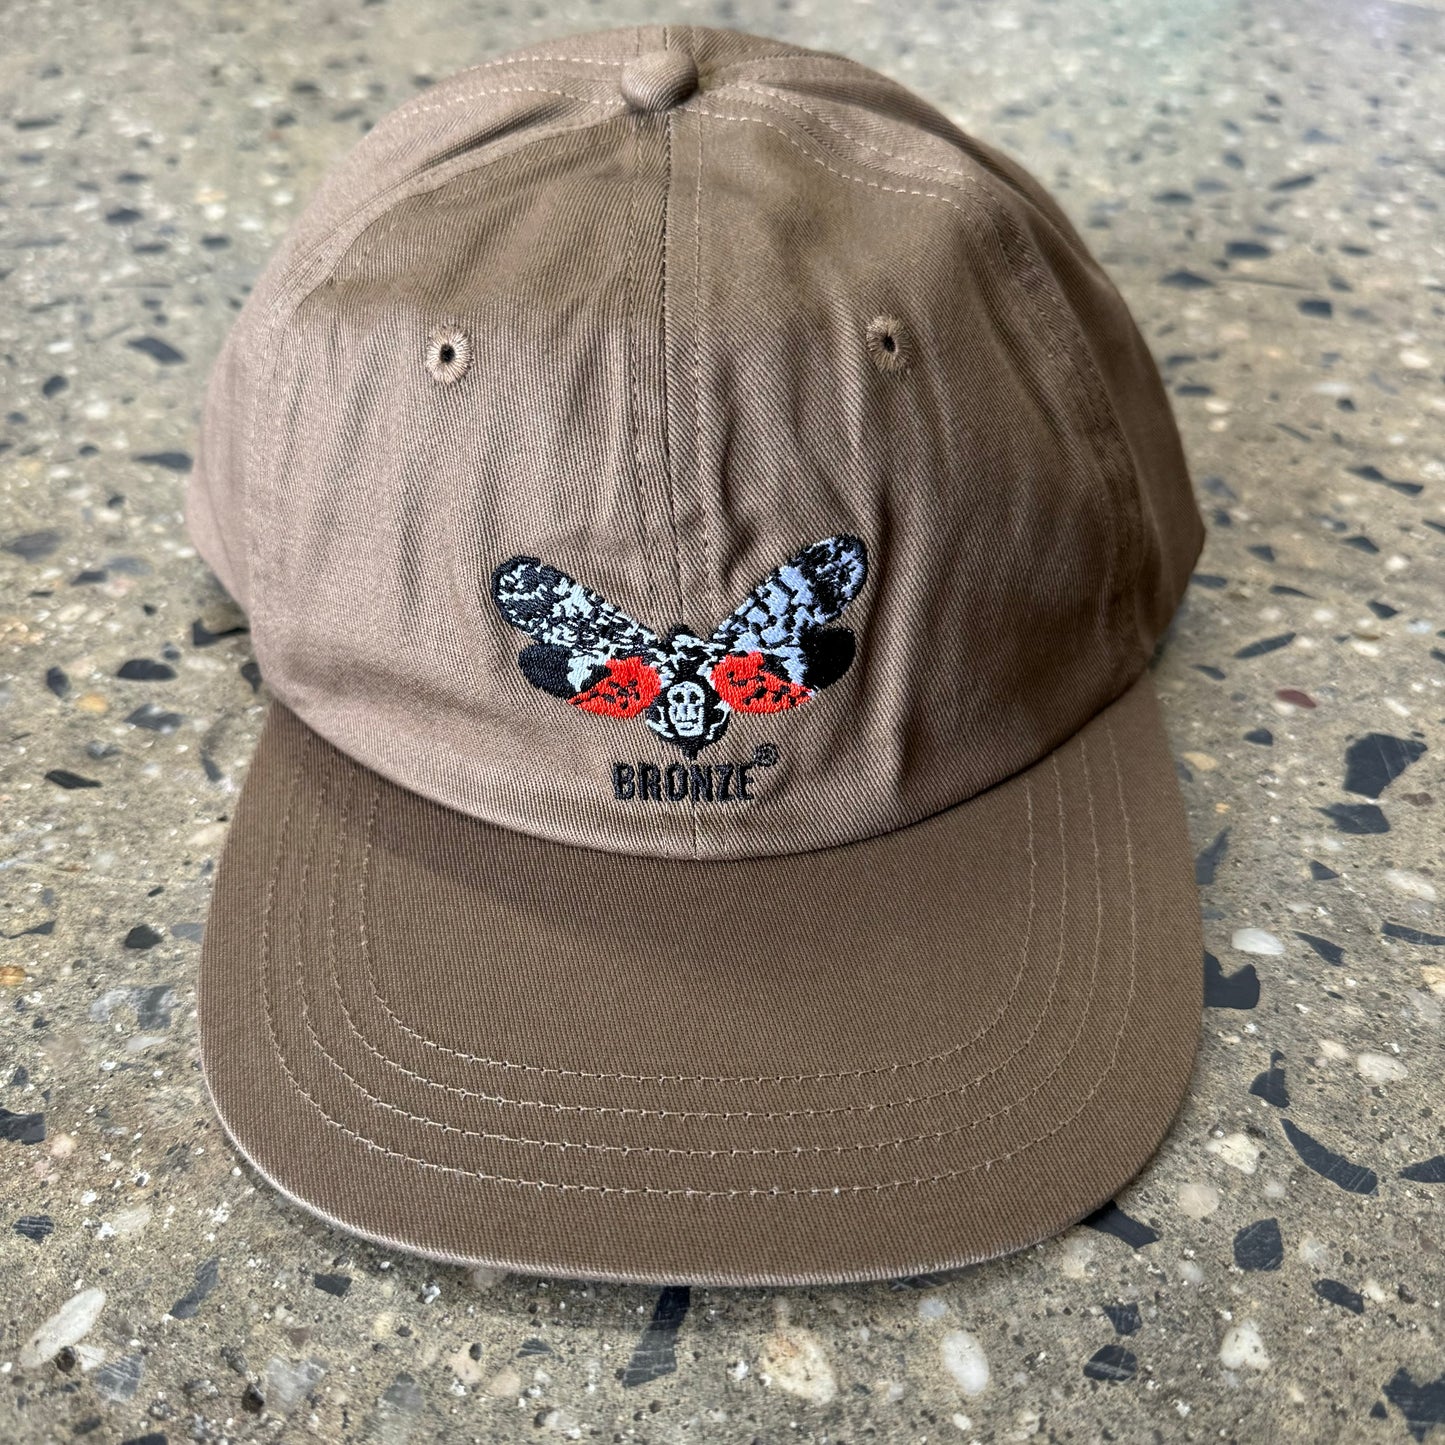 khaki hat with multi color butterfly logo